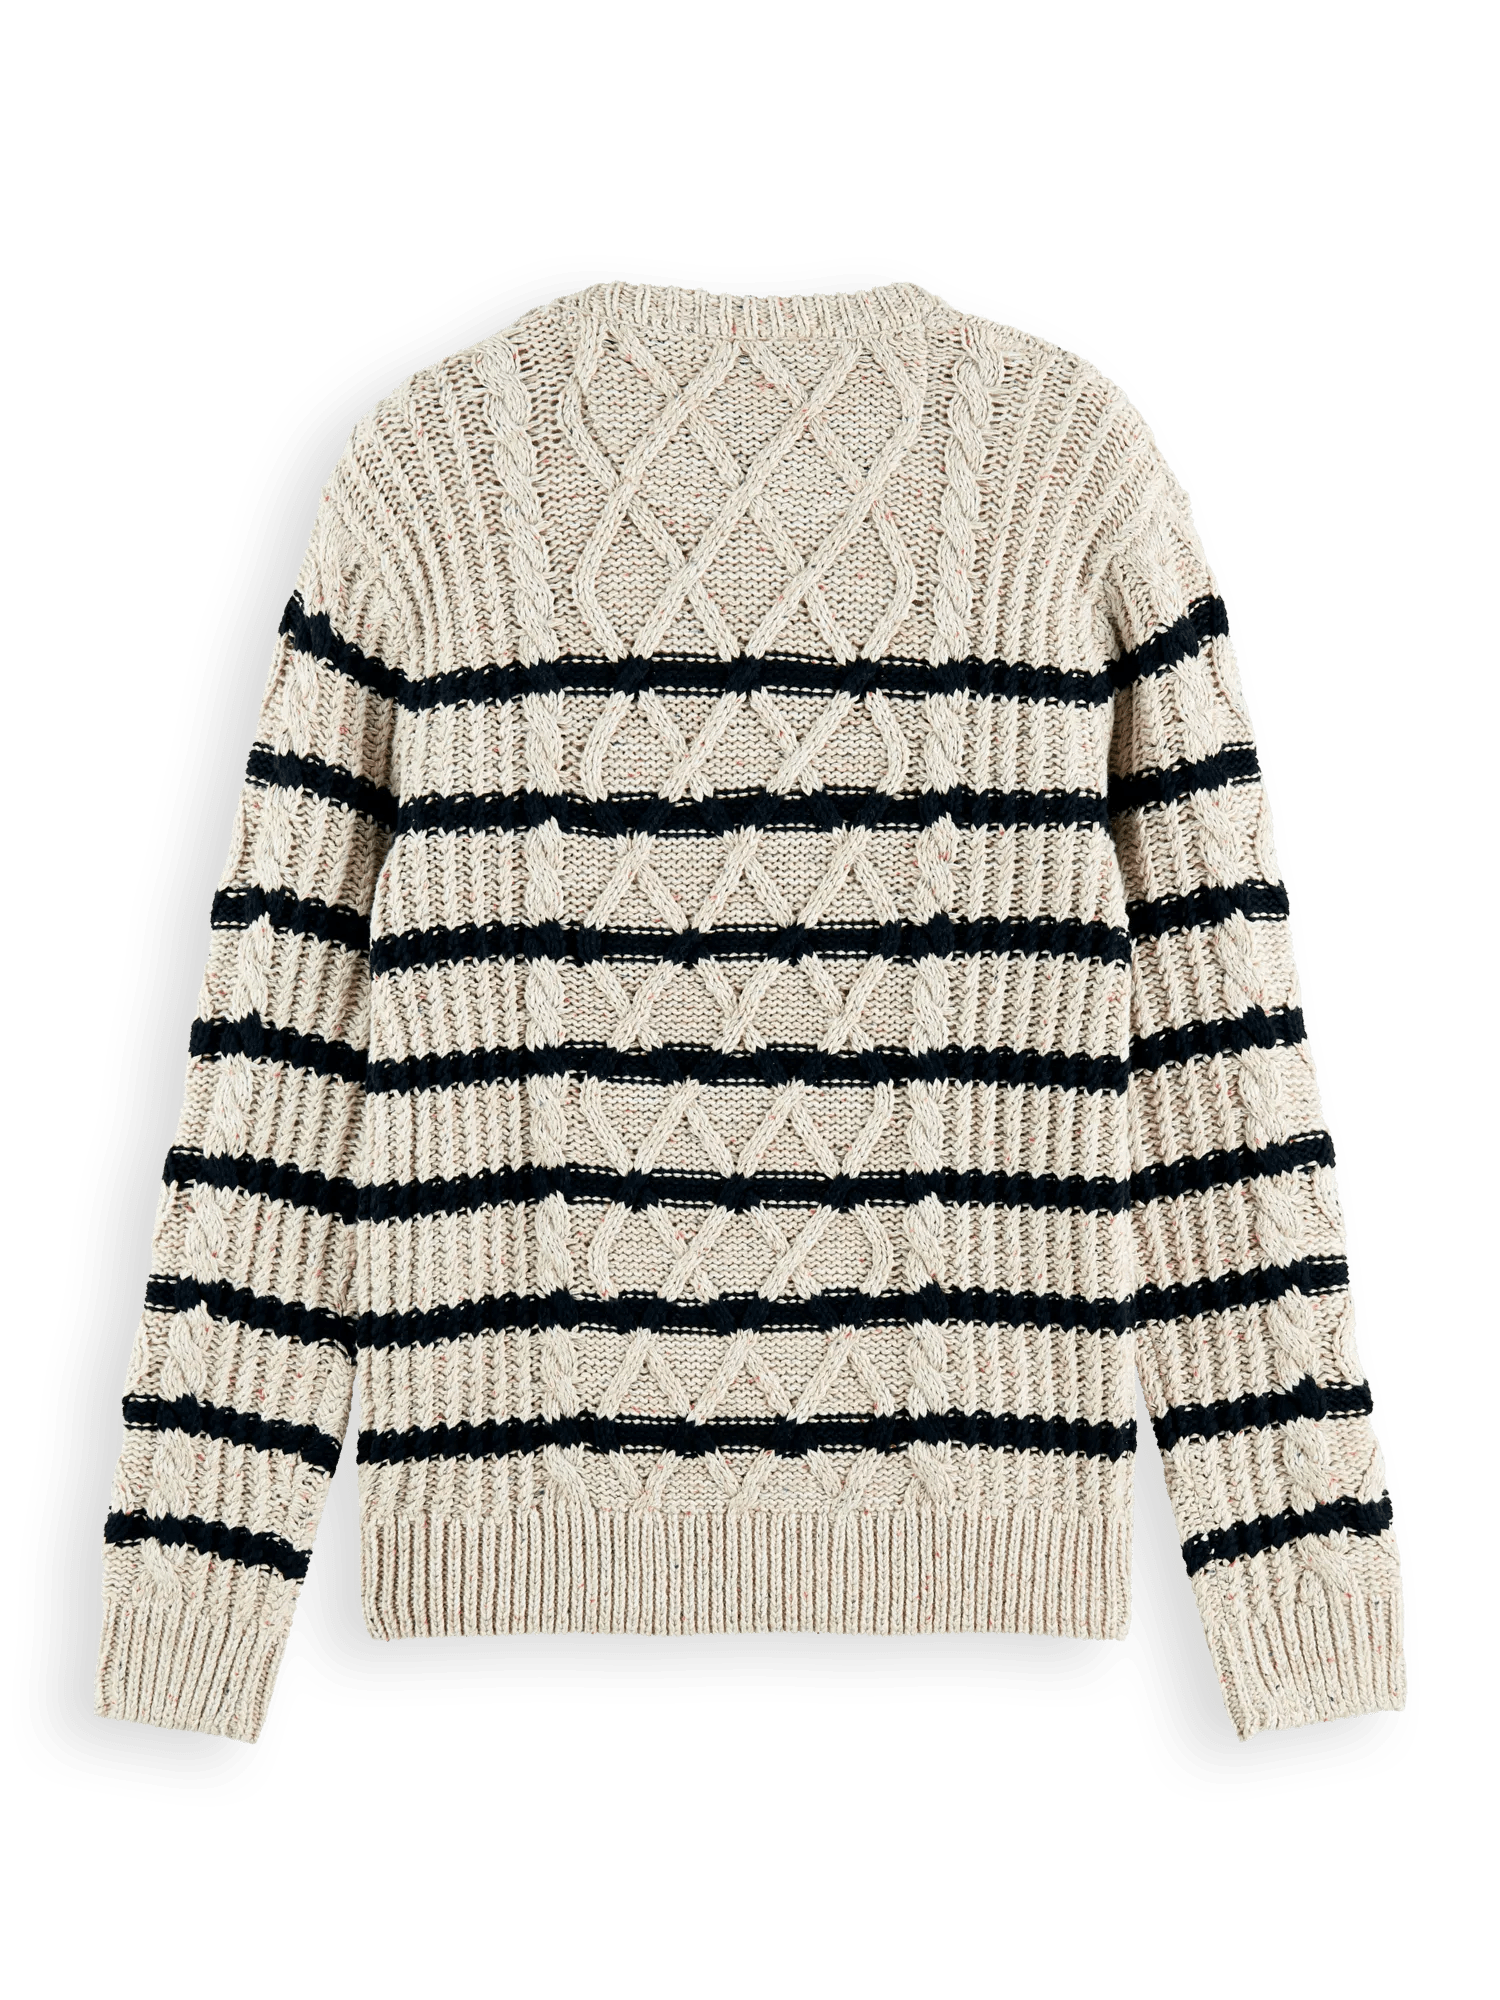 Scotch & Soda Speckled cable knit crewneck sweater BCK